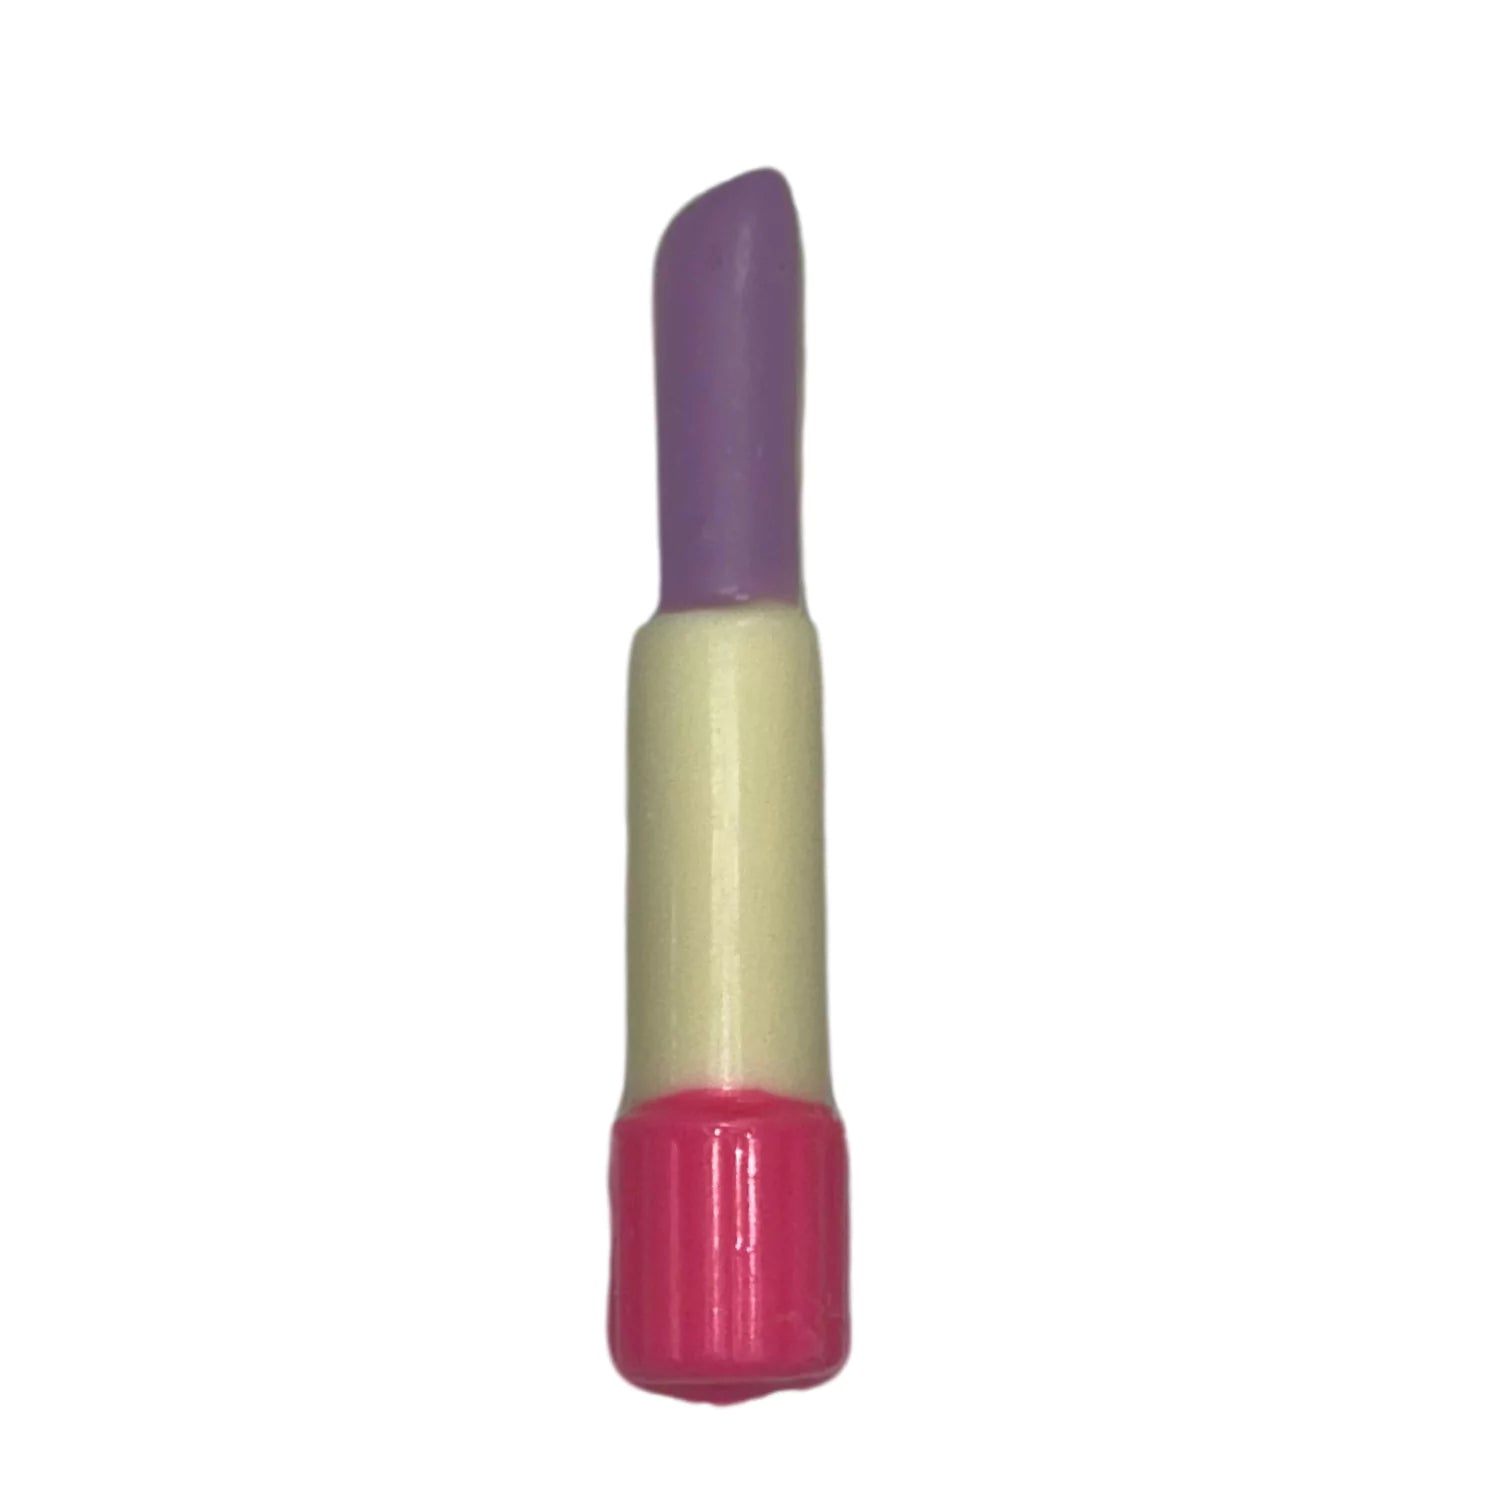 Assorted Colors Lipstick White and Chocolate Milk Chocolate 0.4 oz each Candy Purple White Chocolate